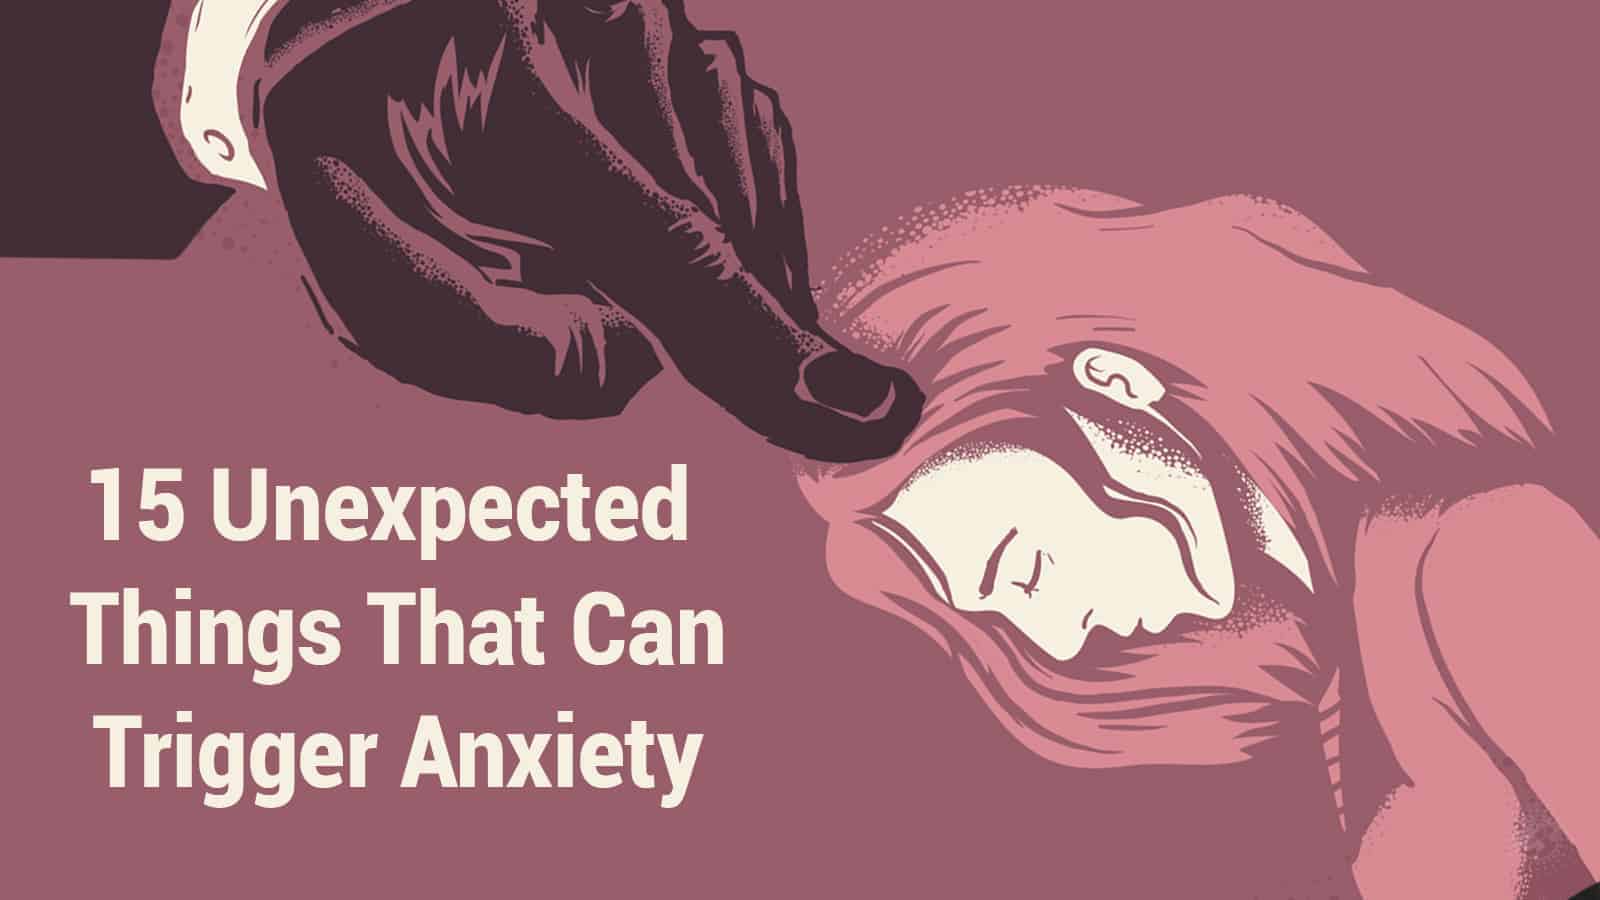 15 Unexpected Things That Can Trigger Anxiety